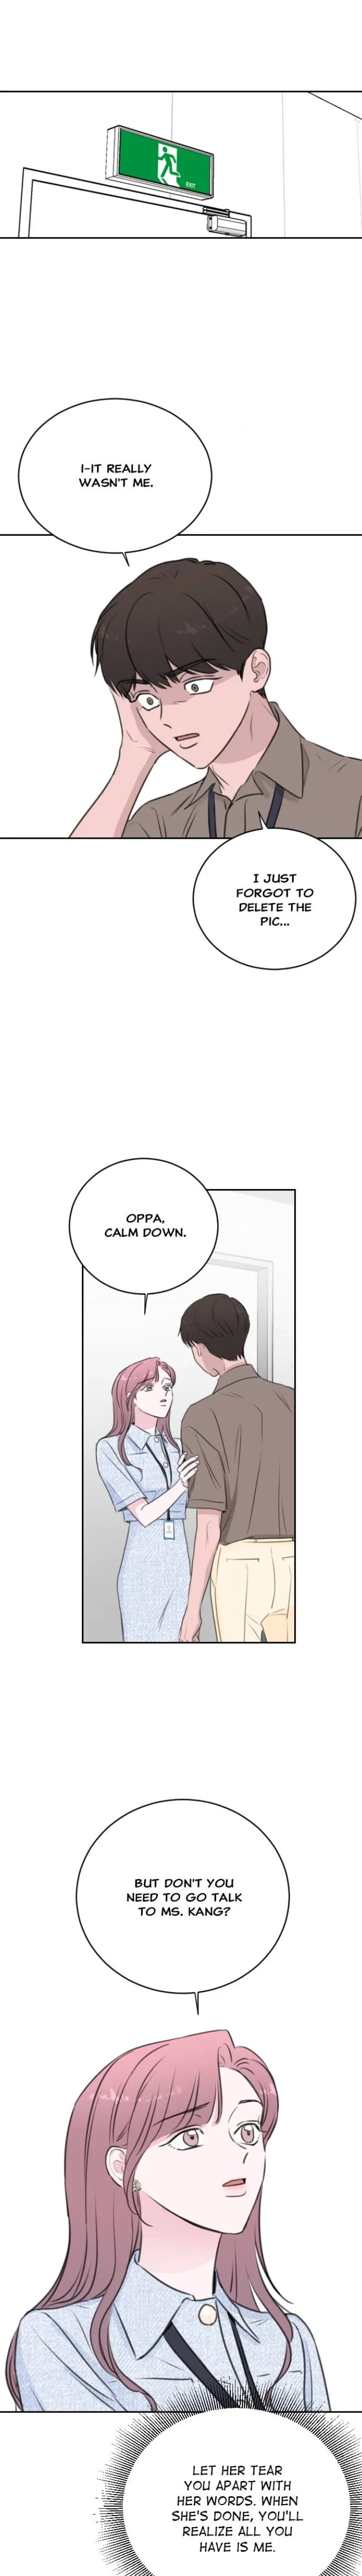 Office Marriage, After a Breakup chapter 21